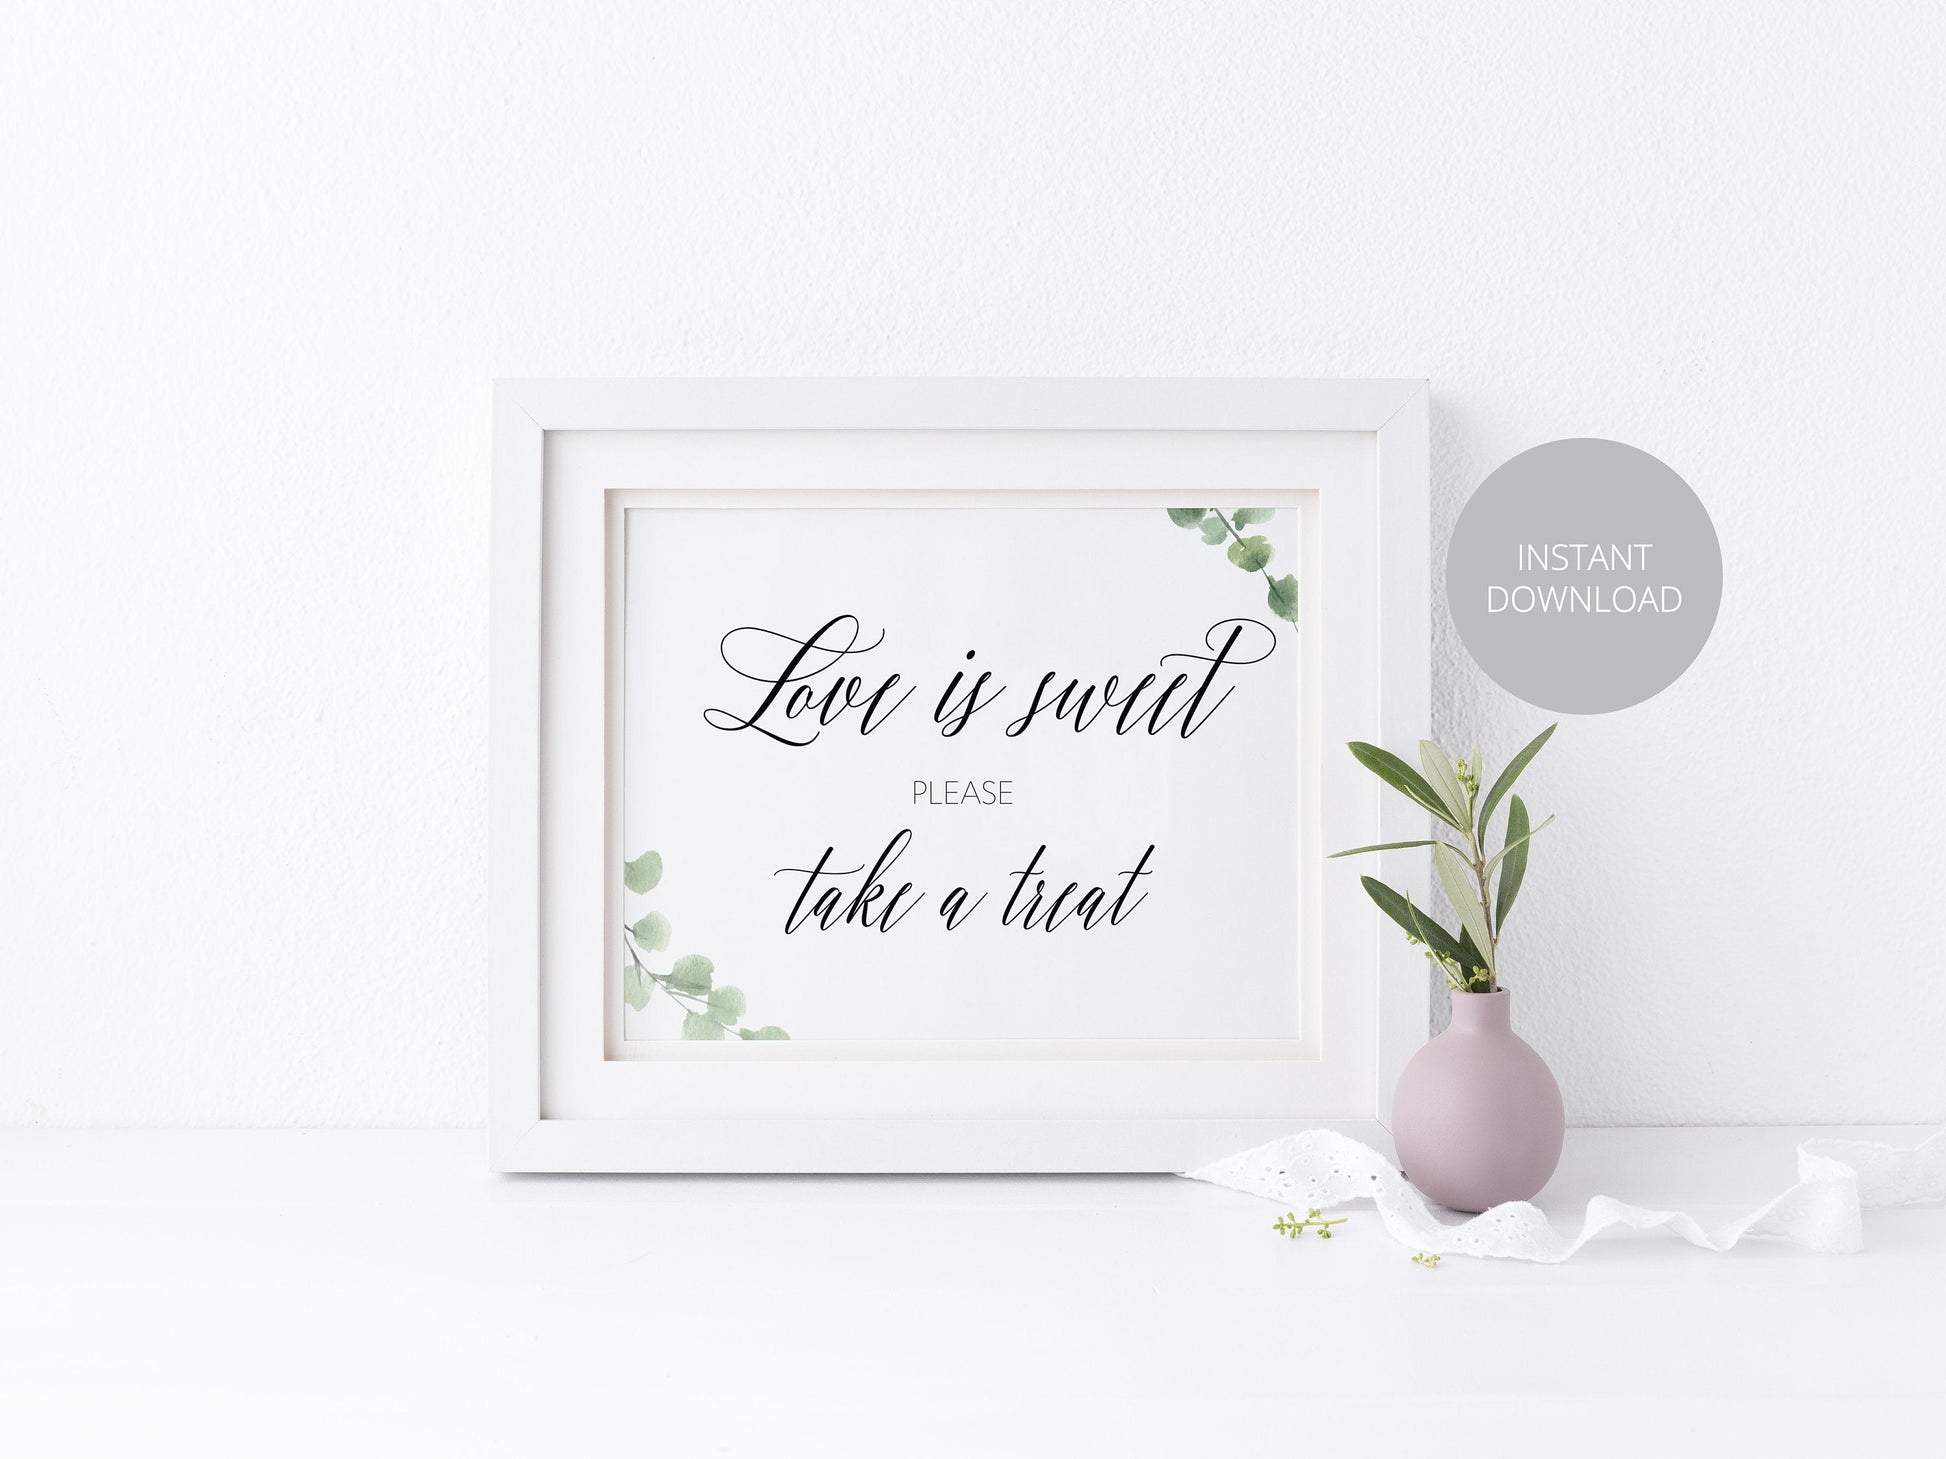 Love is Sweet Sign,Rustic Wedding Signs,Printable,Wedding,Take a treat Sign, Dessert Table, Candy Bar Sign, Wedding Decor, Instant Download SIGNS | PHOTO BOOTH SAVVY PAPER CO